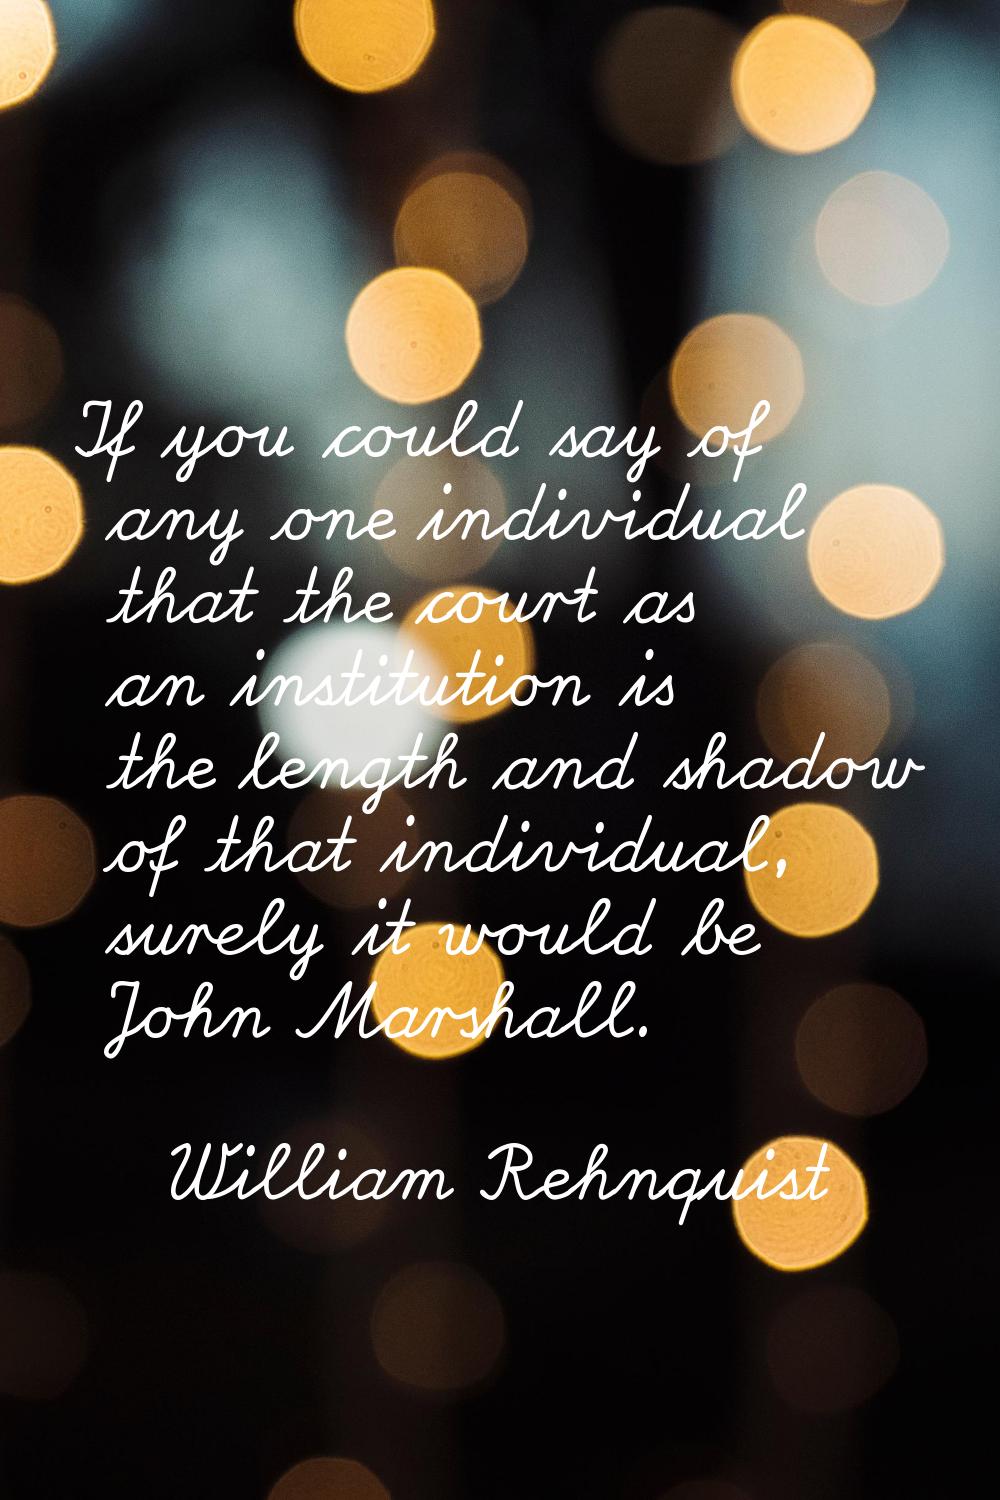 If you could say of any one individual that the court as an institution is the length and shadow of